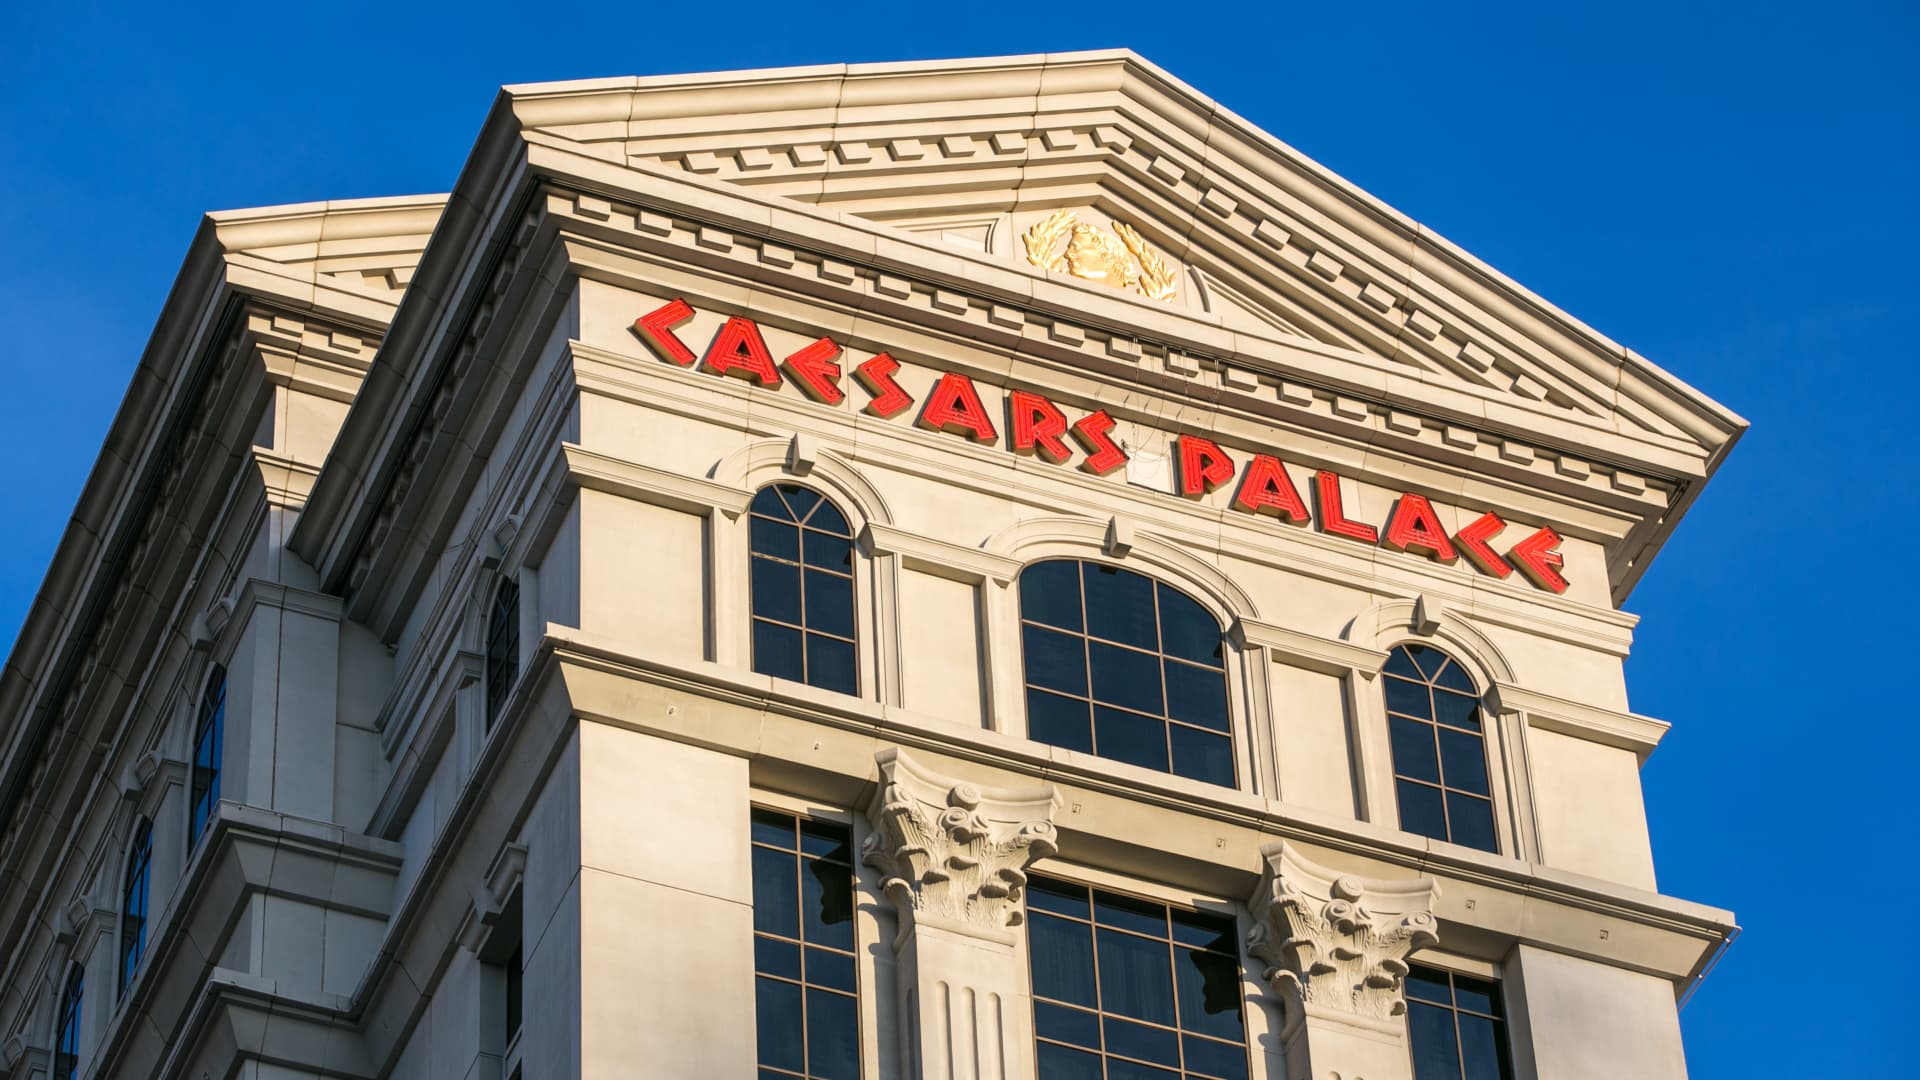 Caesars paid millions in ransom to cybercrime group prior to MGM hack